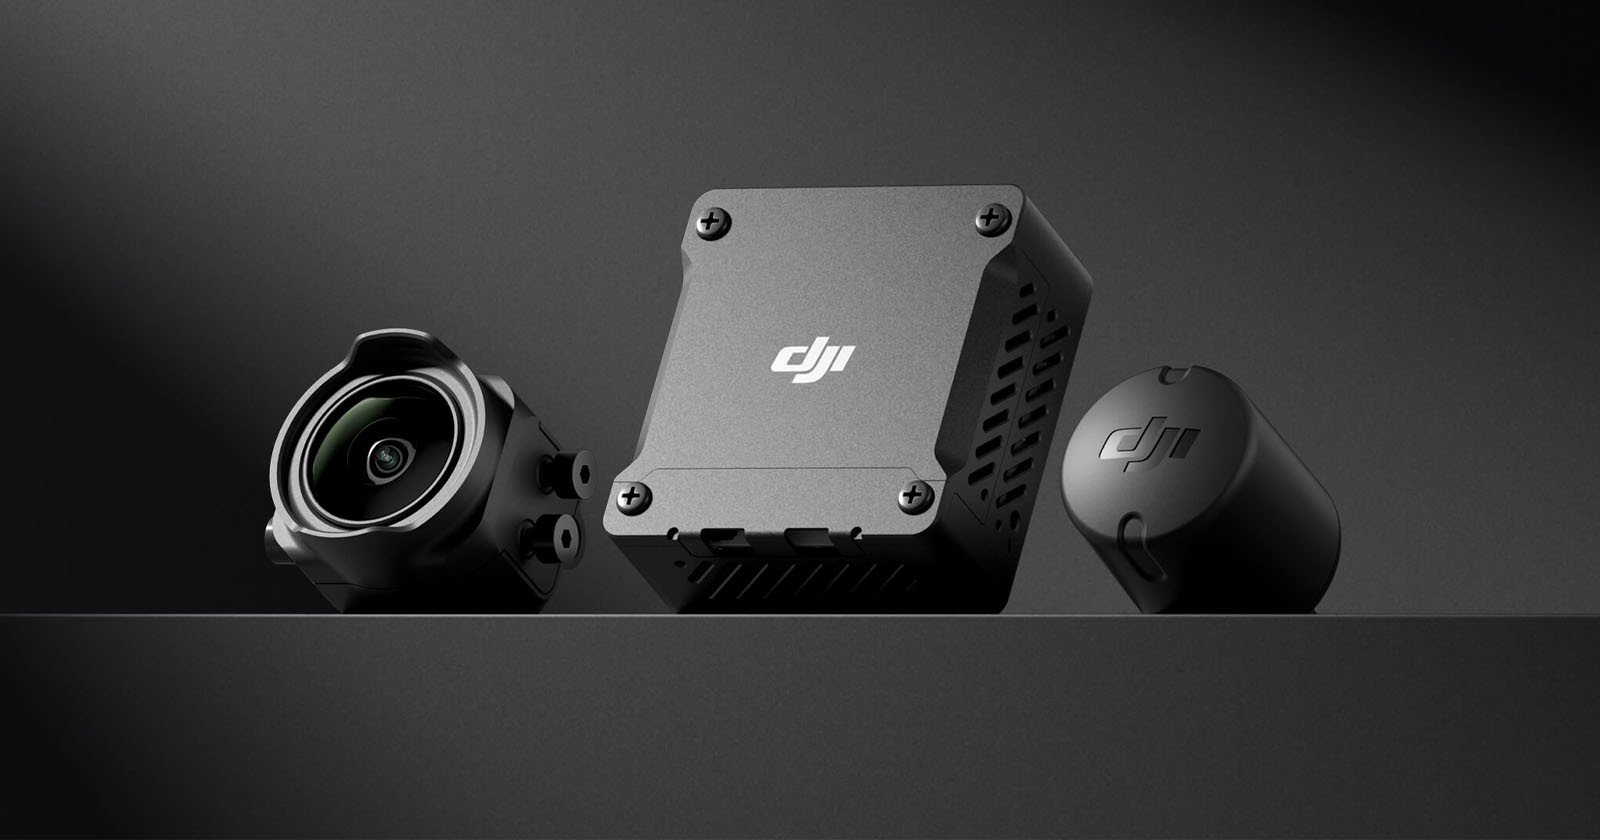 The DJI O3 Air Unit is a Compact, Lightweight Camera for FPV Drones